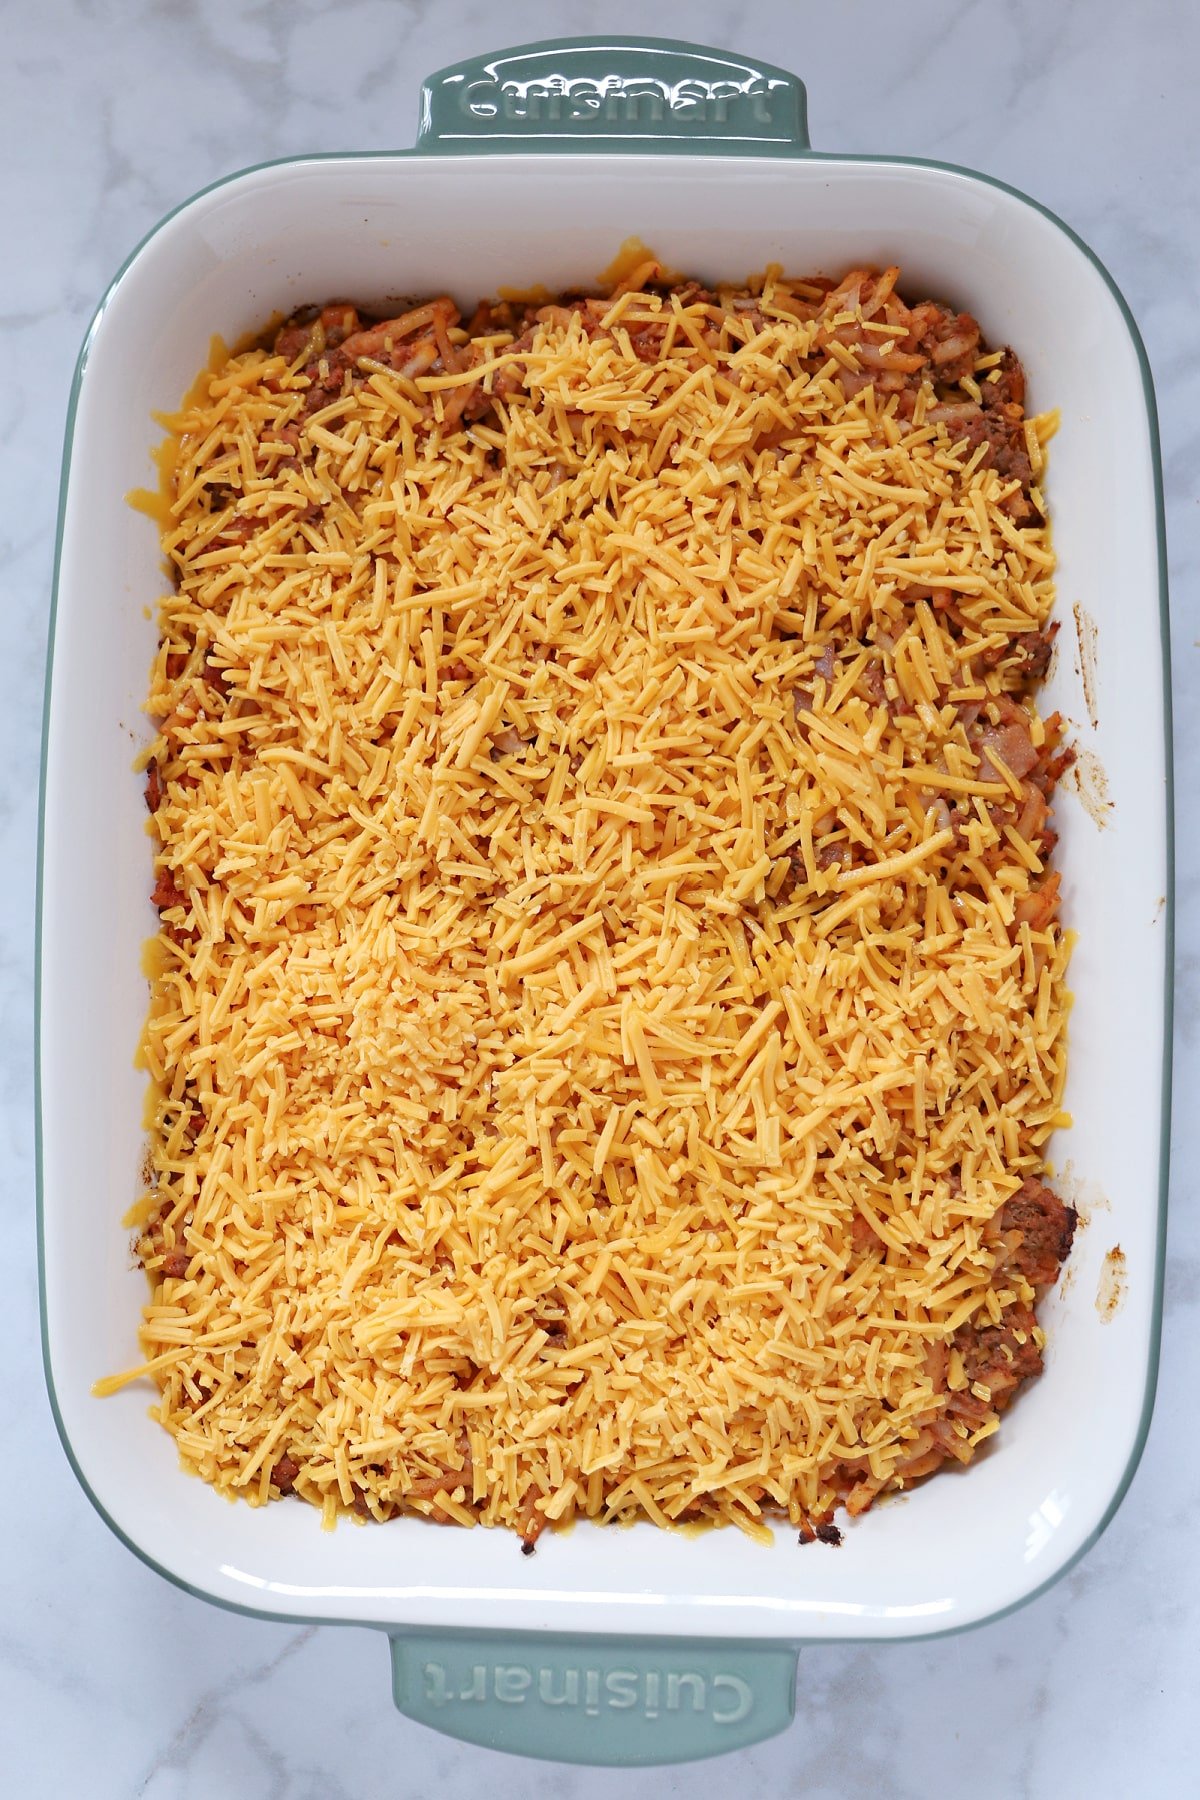 Hamburger hashbrown casserole ready to be baked.